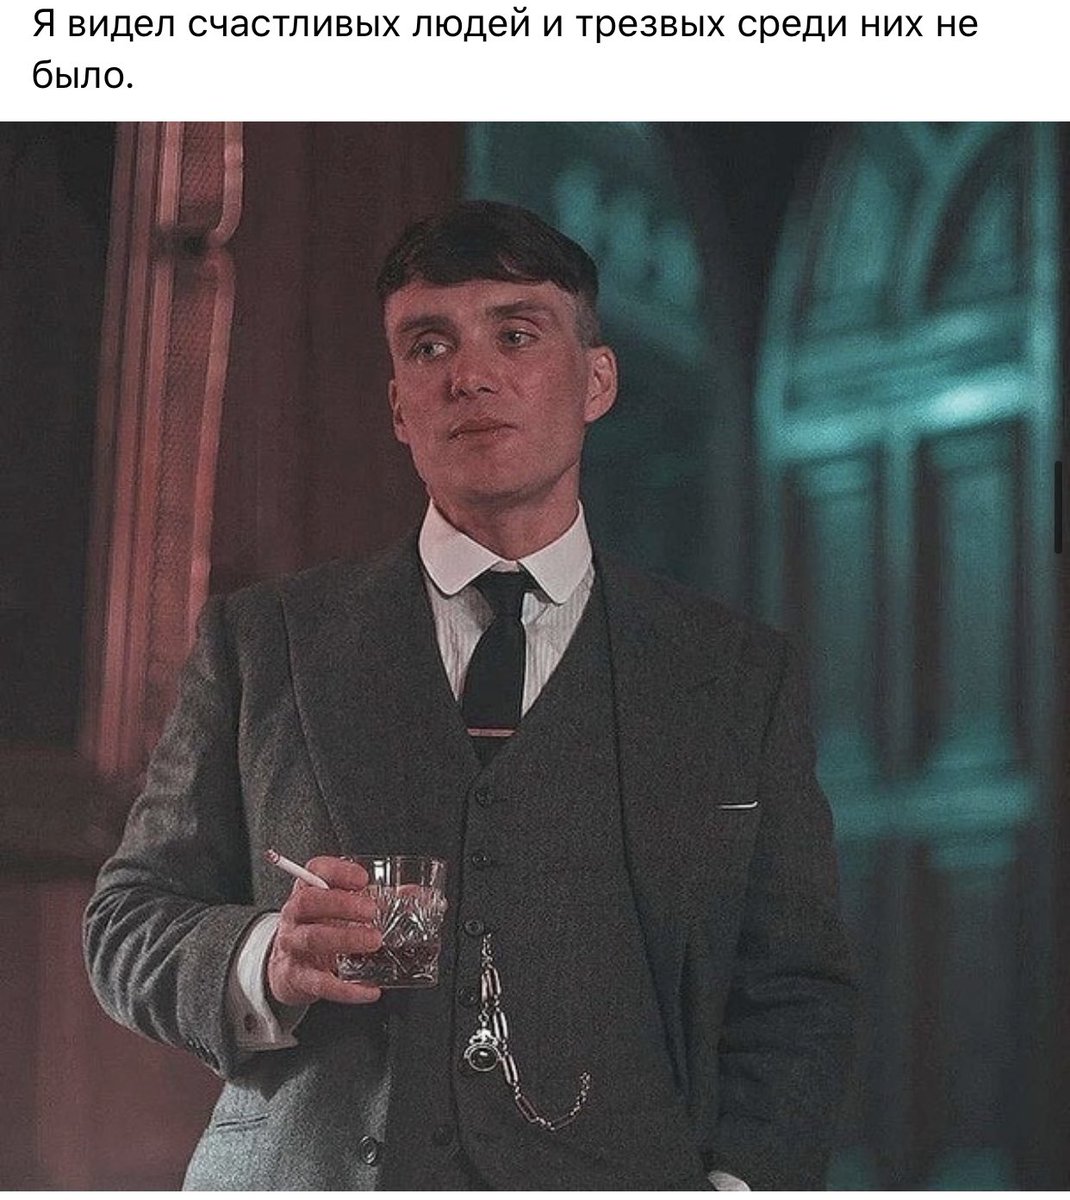 “i’ve met happy people, and there were no sober ones amongst them”- thomas shelby, high af 24/7